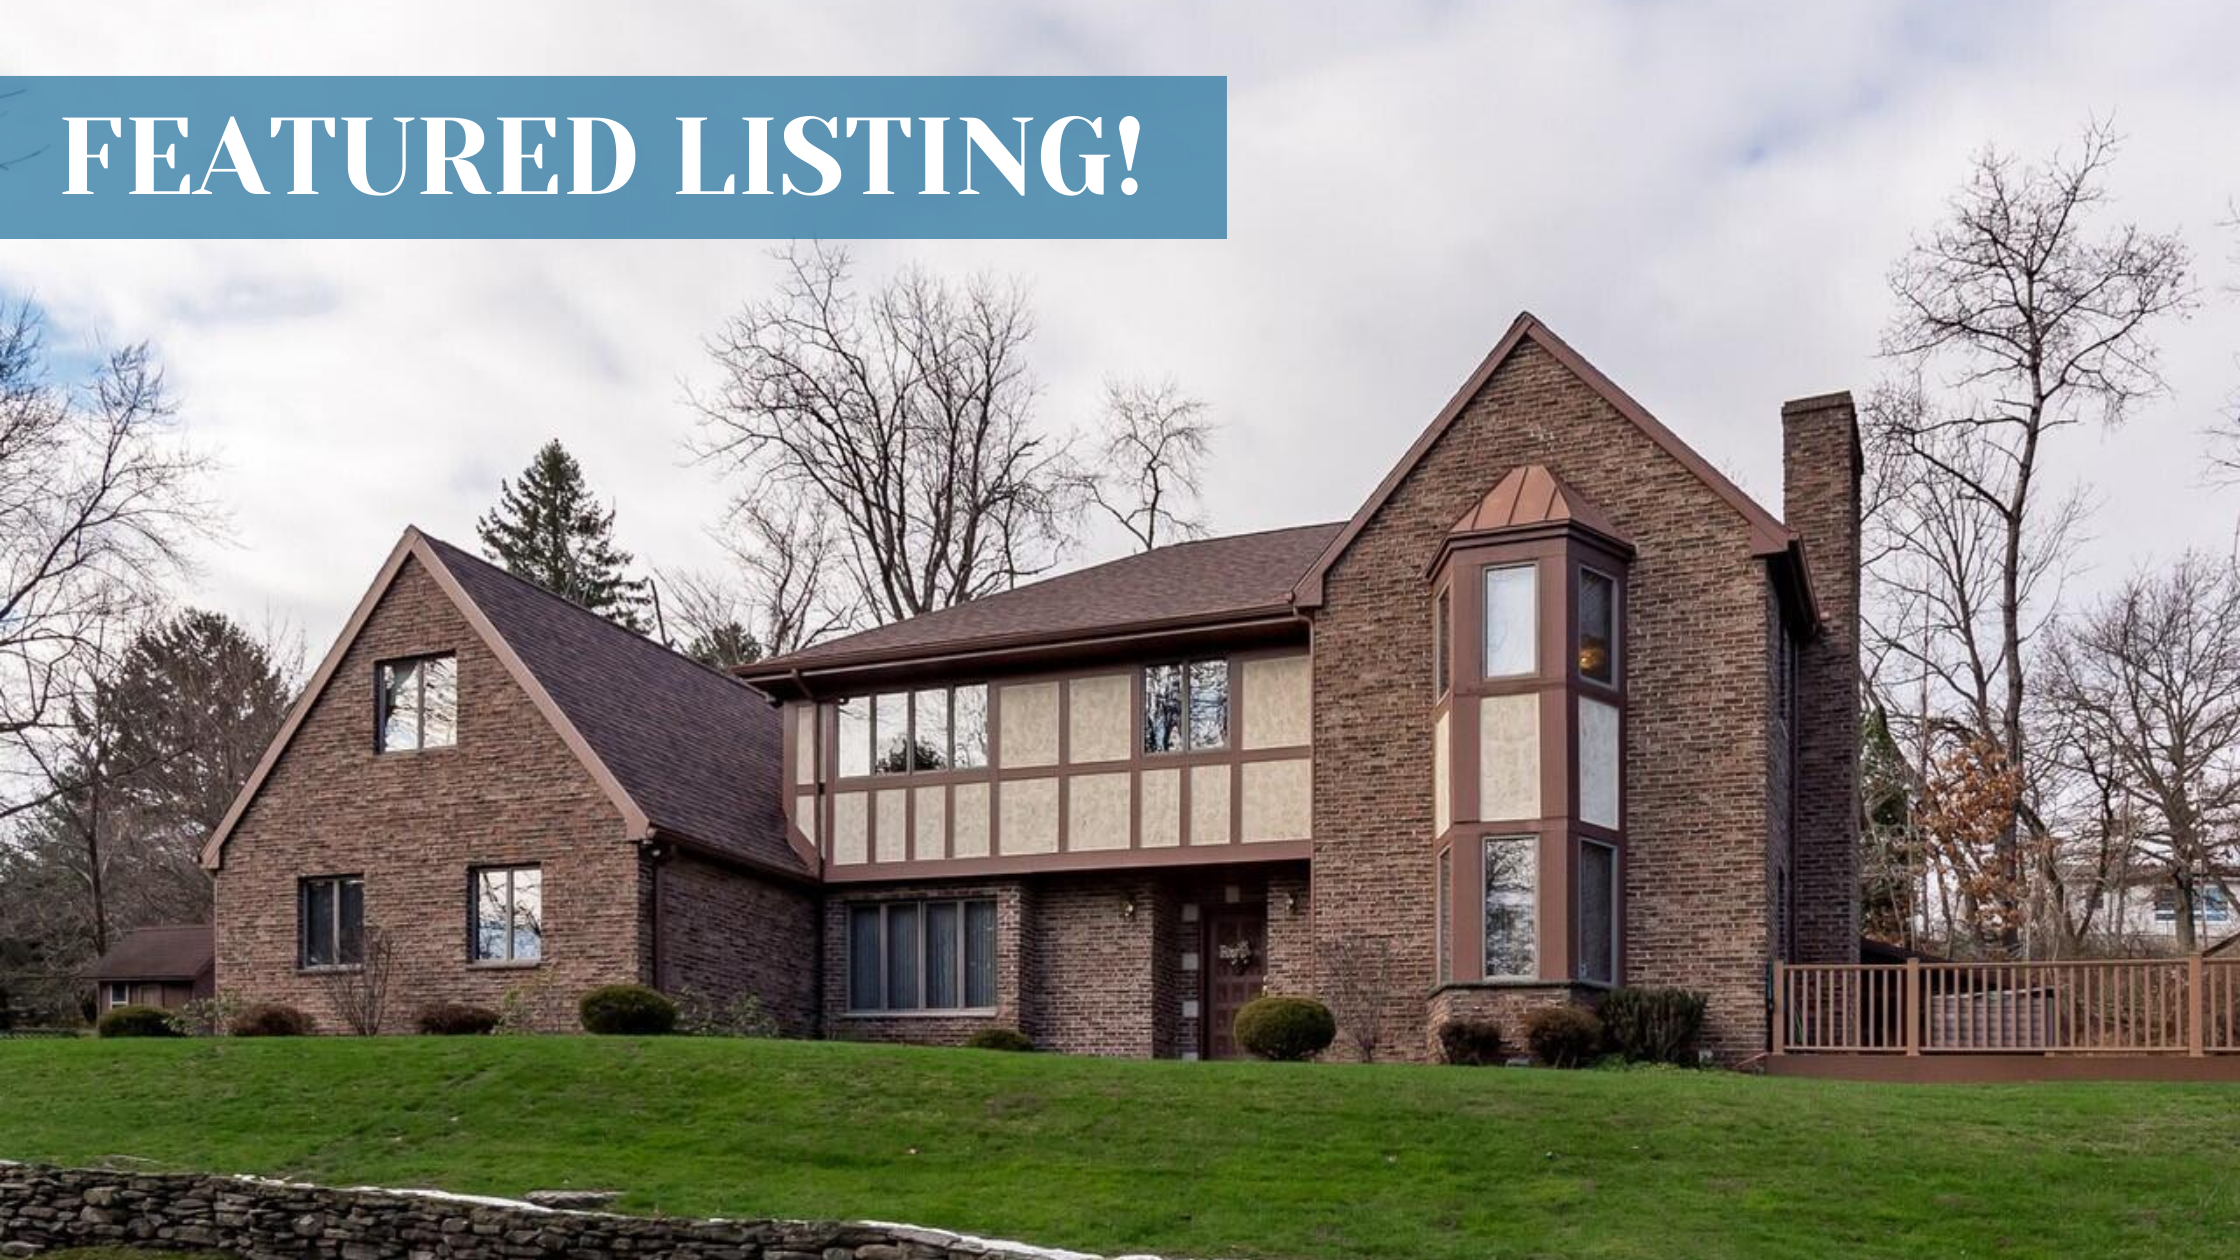 Lewith & Freeman Featured Listing: Stately Custom Tudor Home on Two Acres